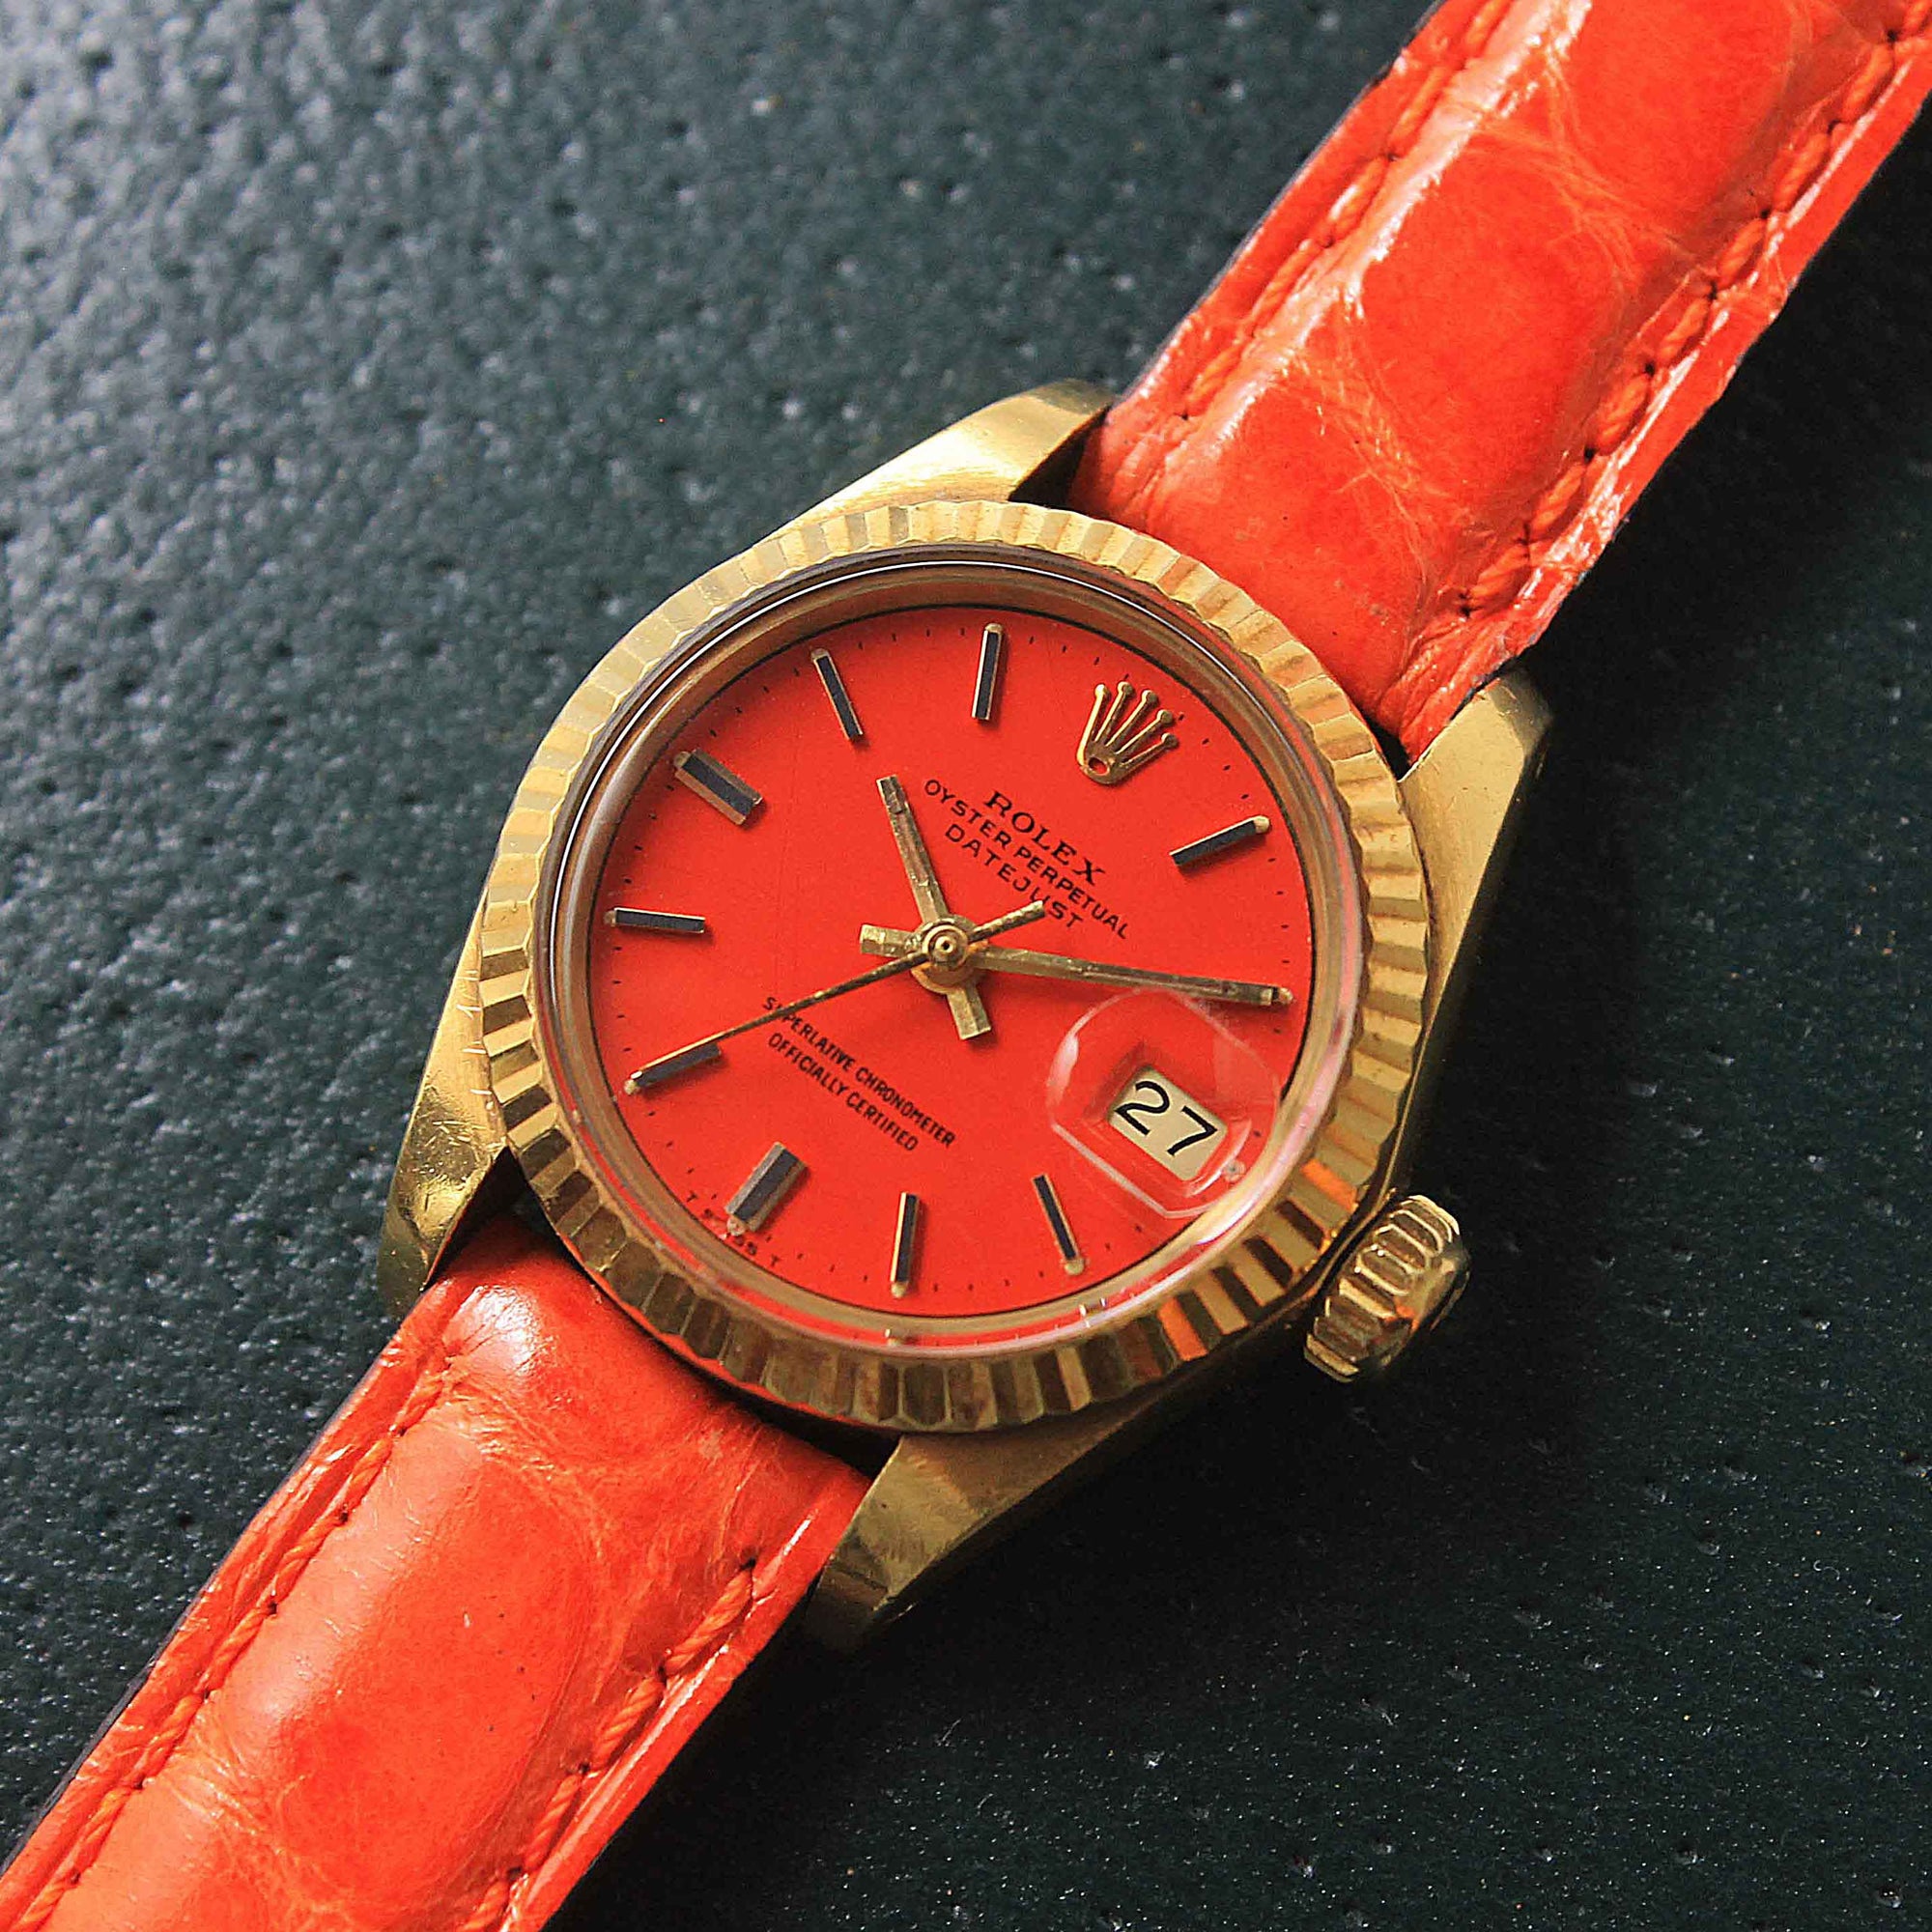 The Watch I Would Have Liked for Valentine’s (And the One I Would Have Given)